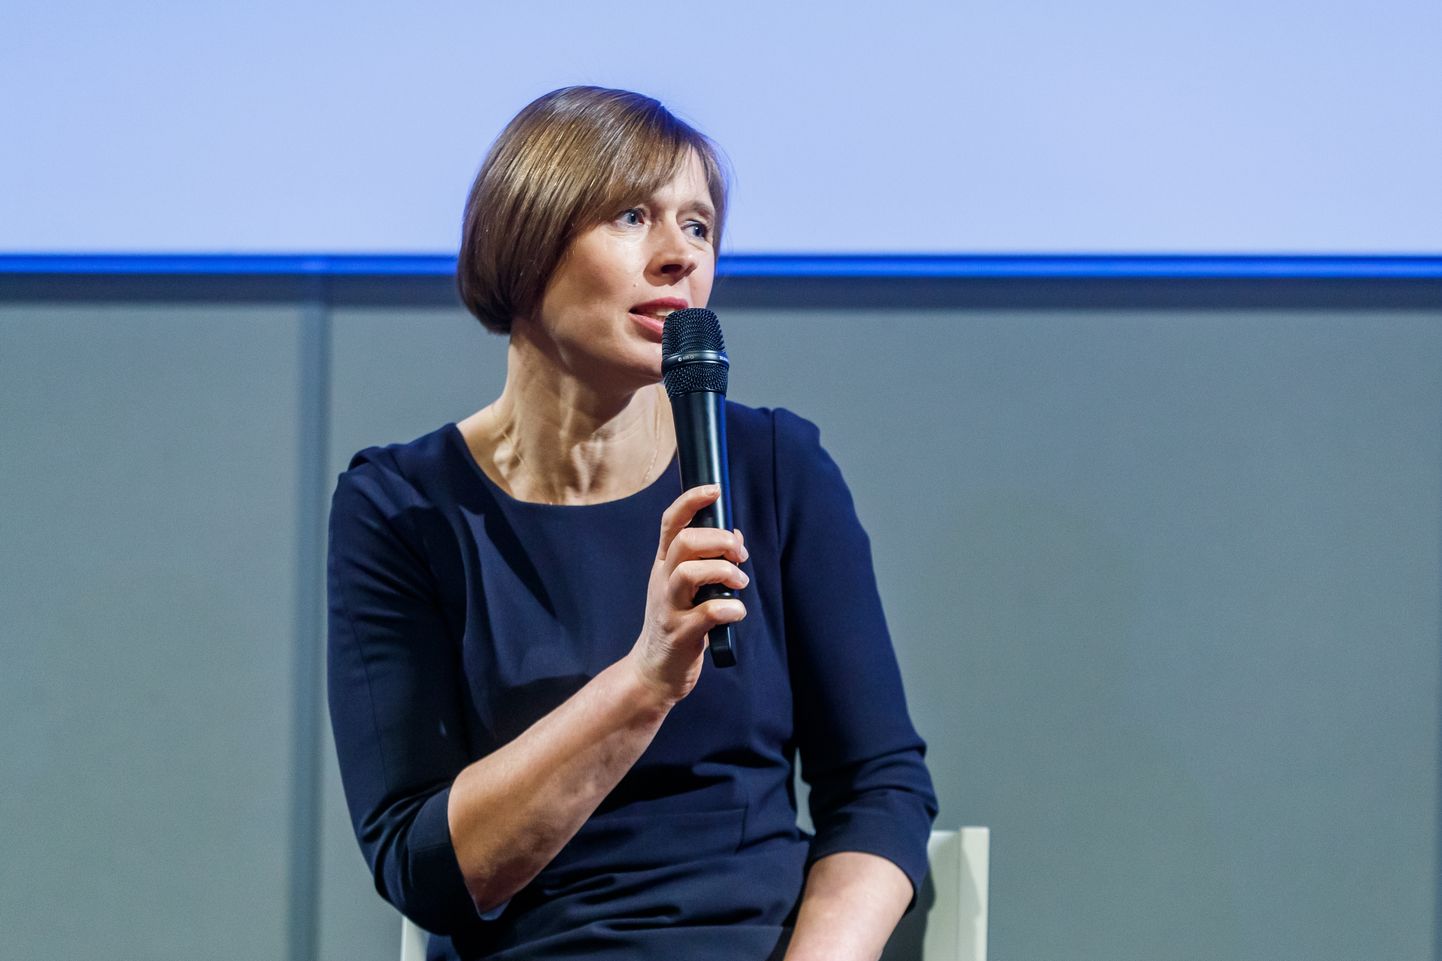 Kersti Kaljulaid leaves Alexela supervisory board due to gas imports from Russia.